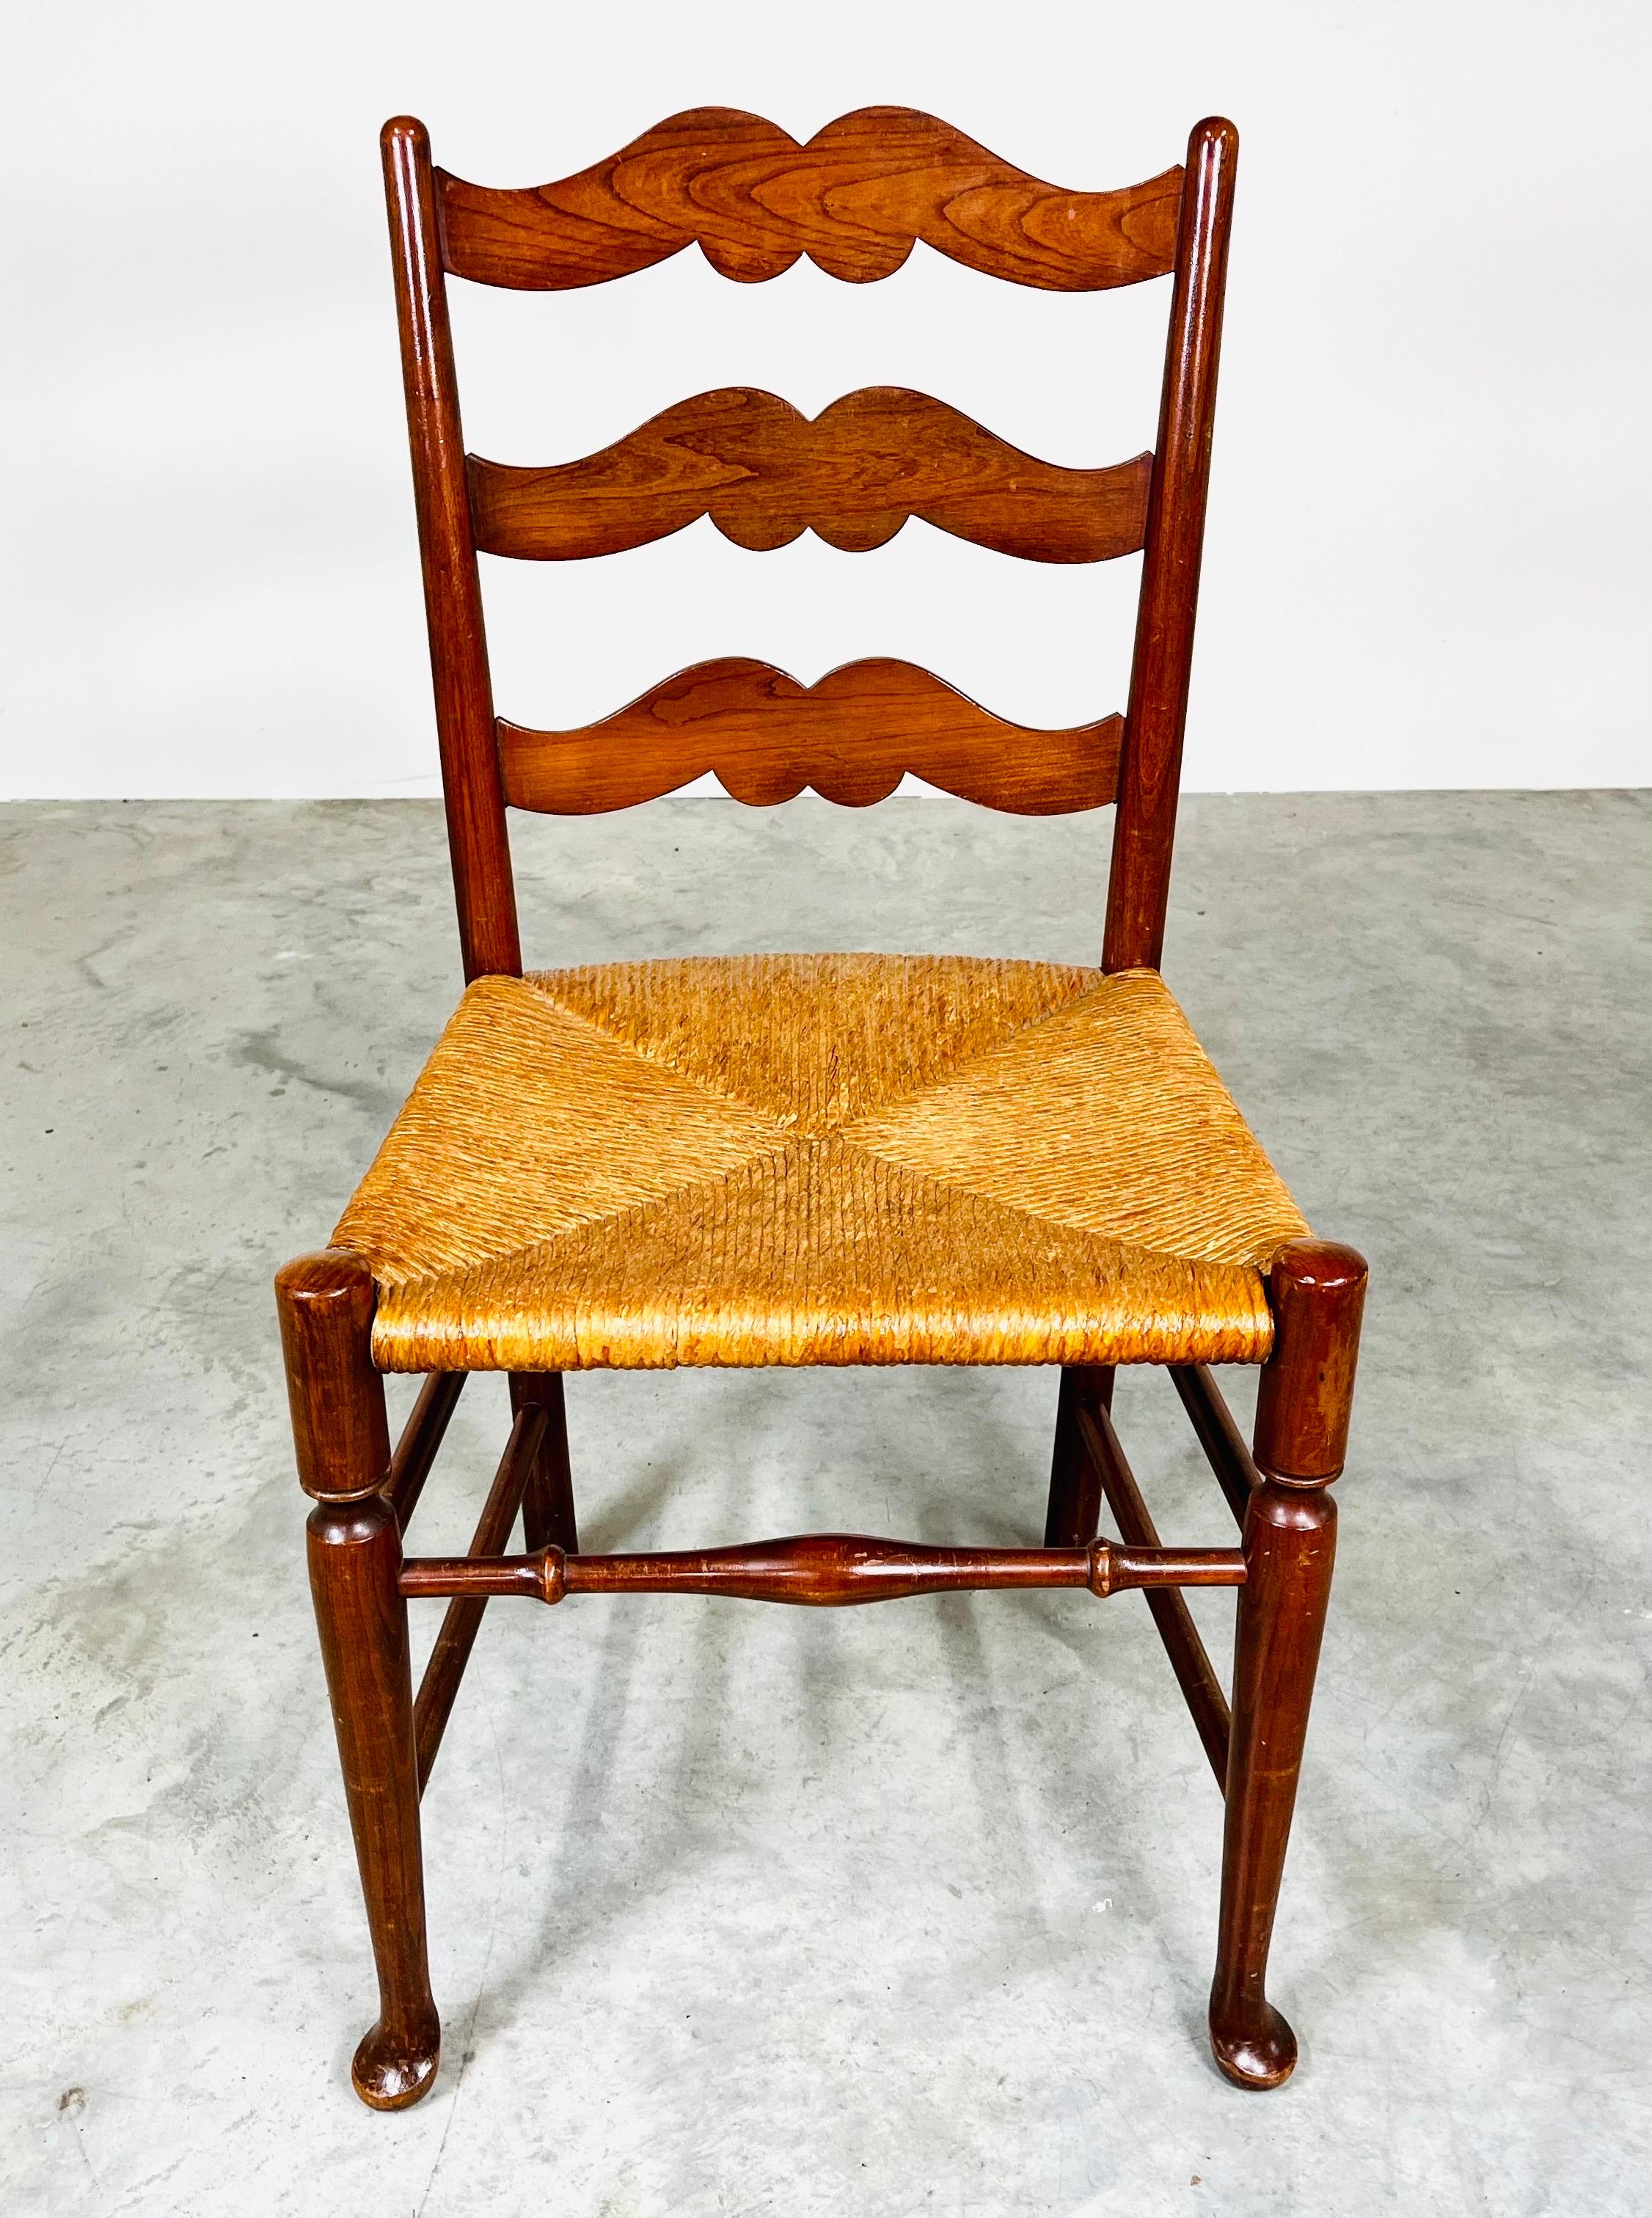 An attractive corner, accent or desk chair in Cherry having strong rush seat with ladder back frame. In excellent condition having strong, solid joints and tightly woven rush seat with clean finish. 
England, circa 1890. 
Measures: 35x18x17.5” HWD